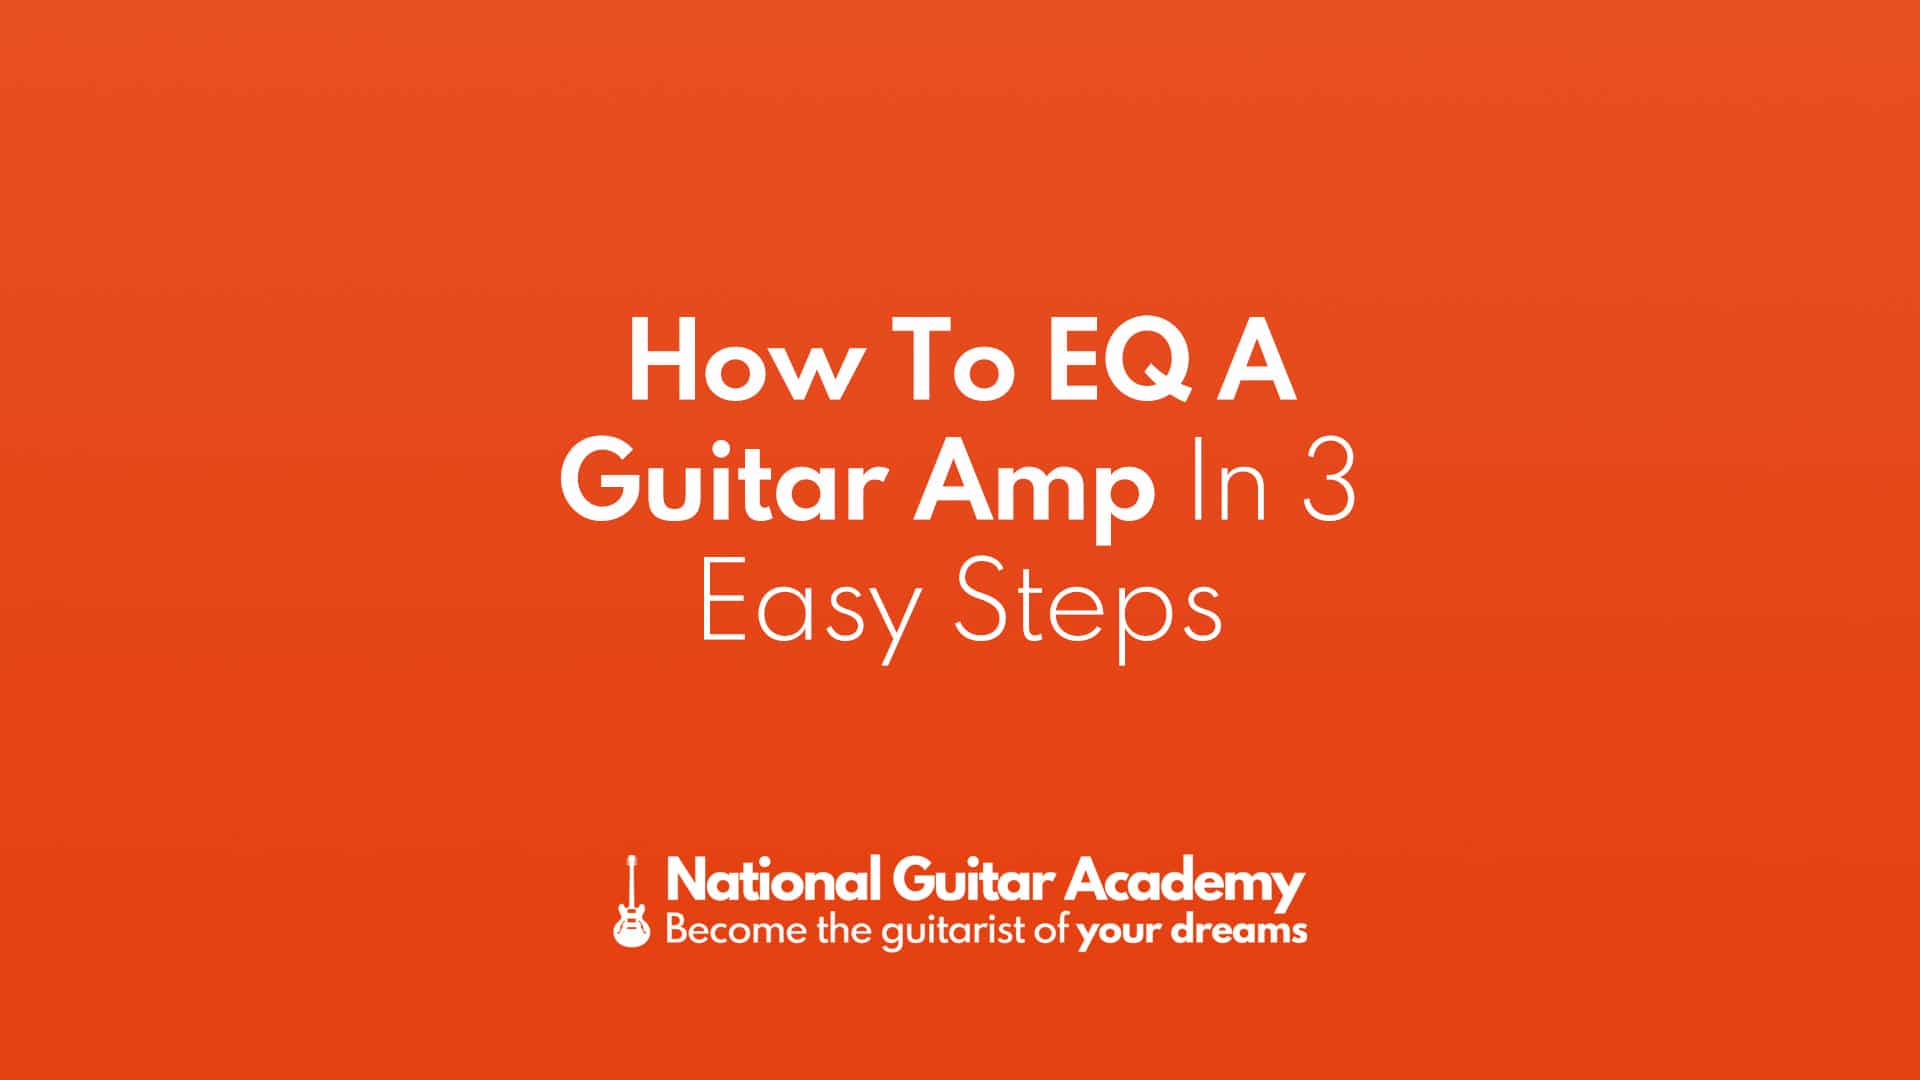 How To EQ A Guitar In 3 Easy Steps - National Guitar Academy